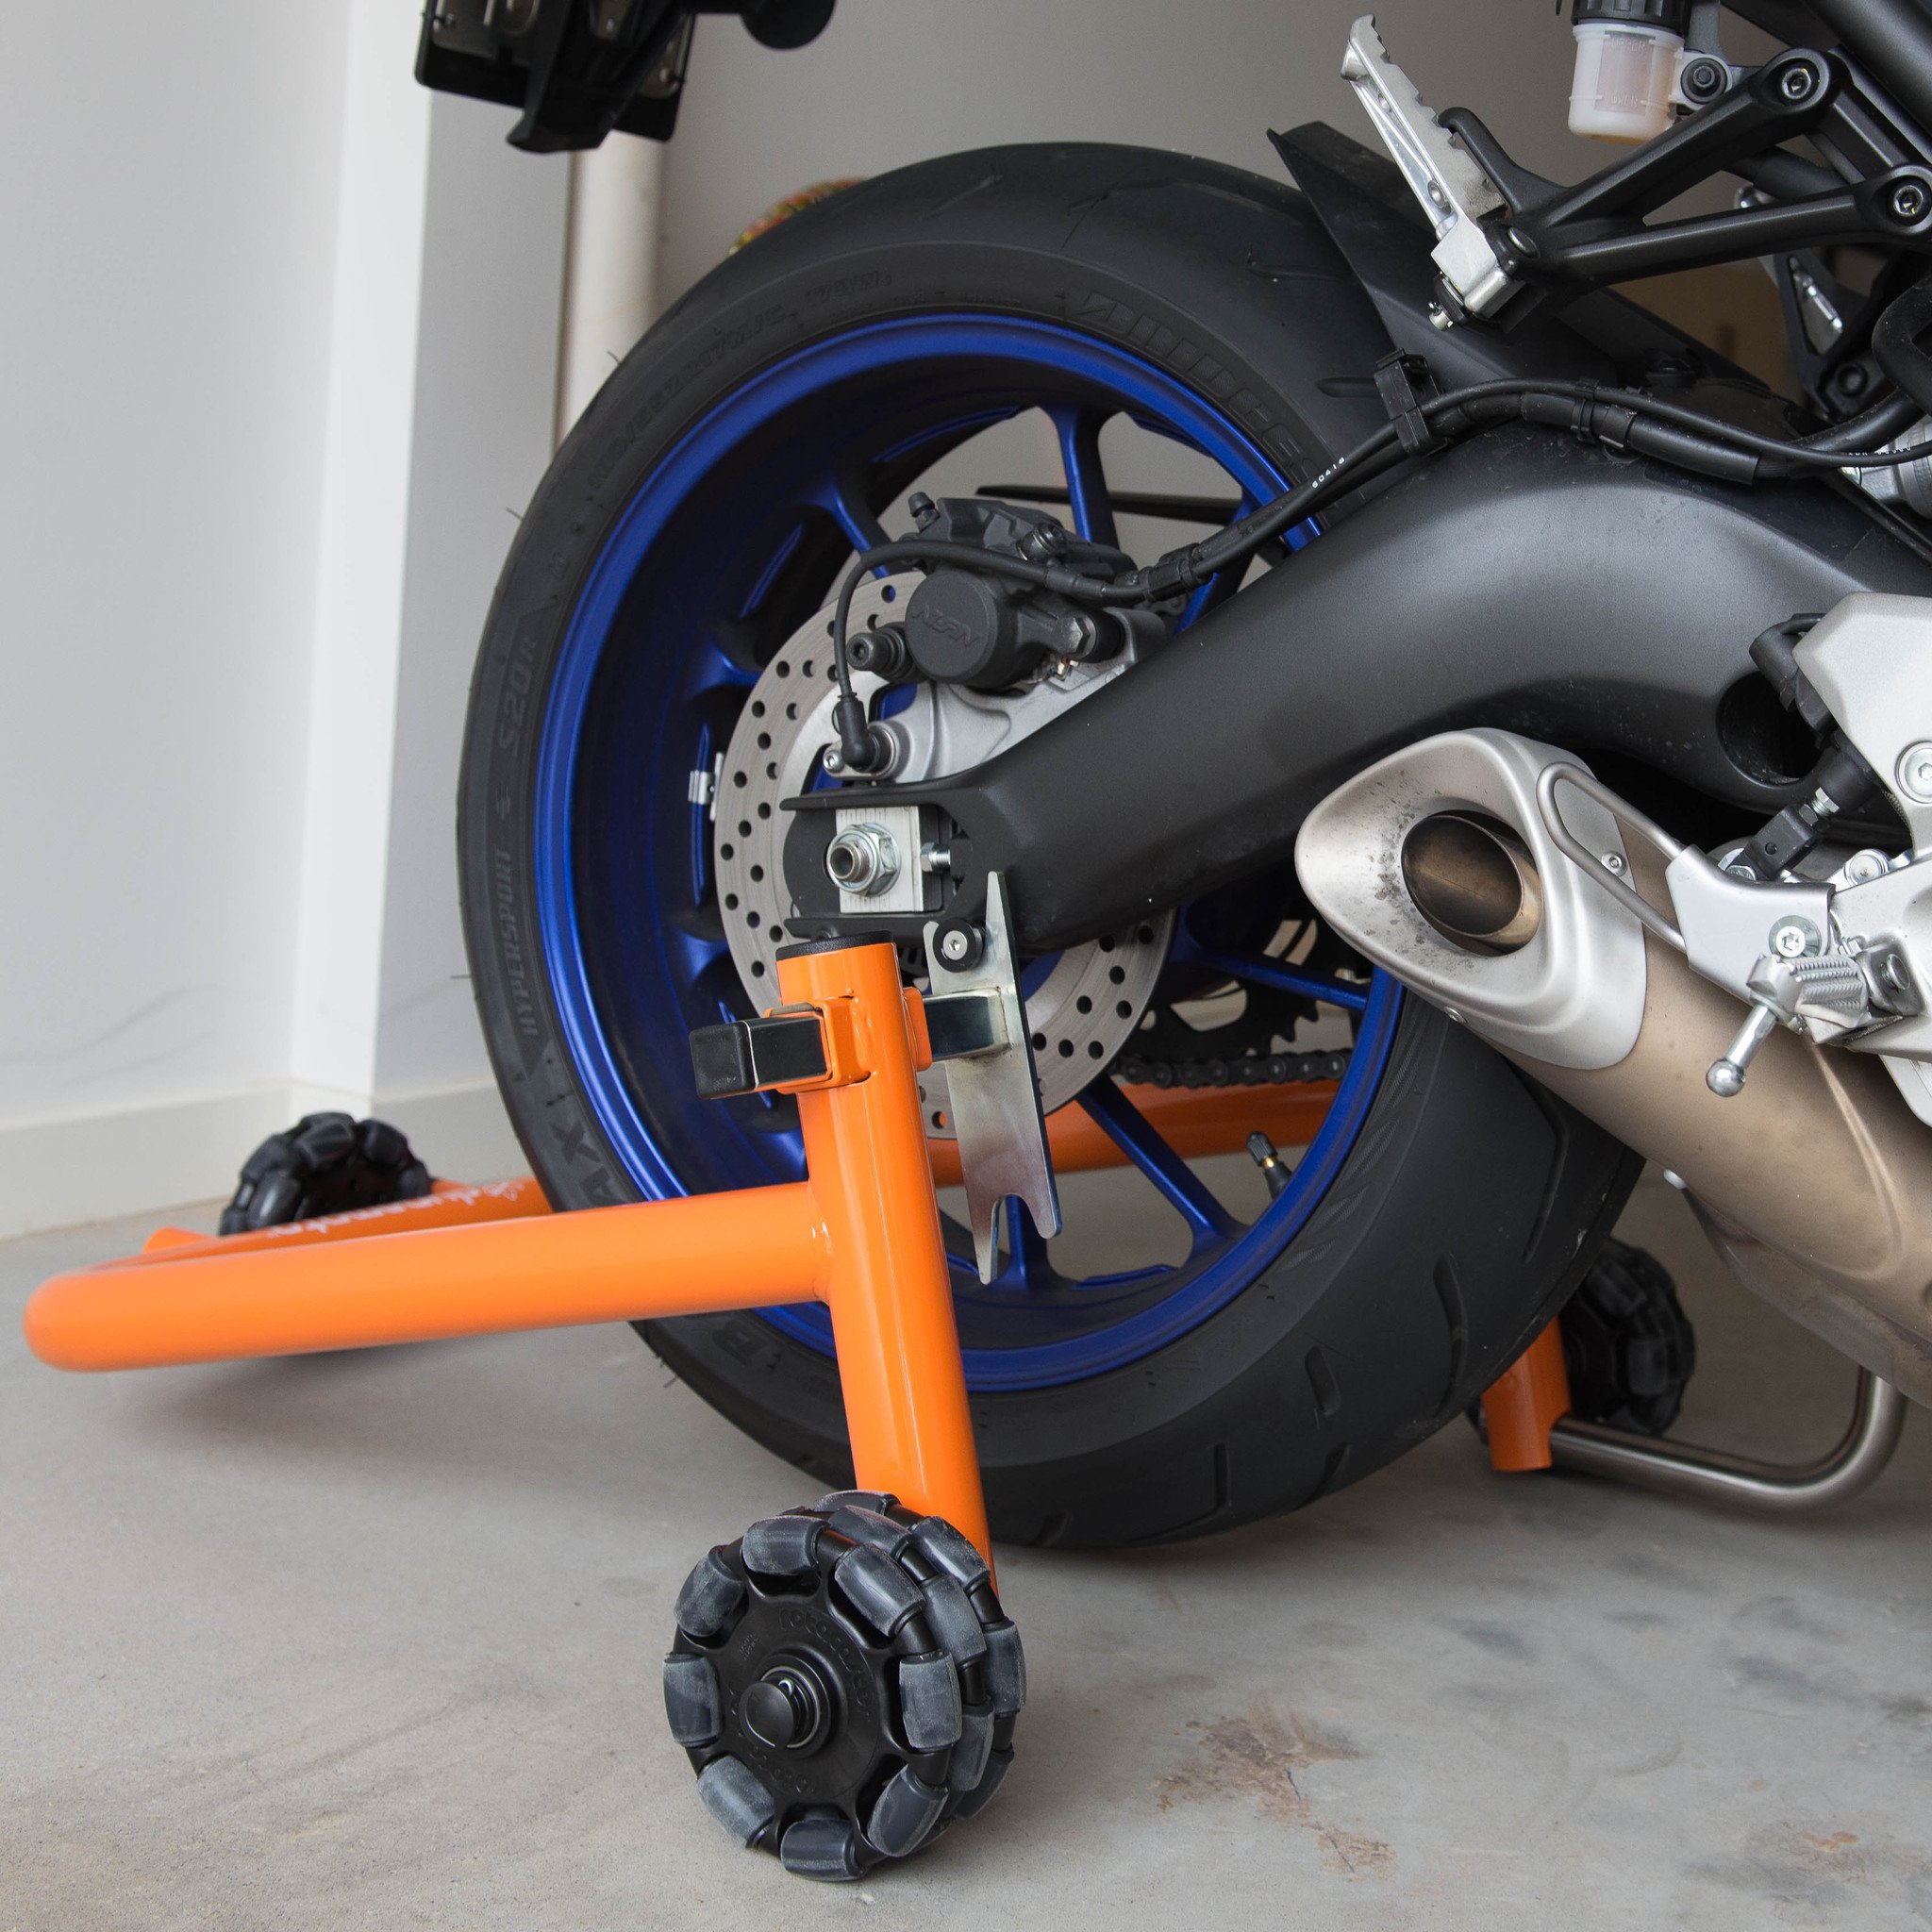 Universal Motorcycle Dolly - Move & Store Your Motorcycle With Ease ...